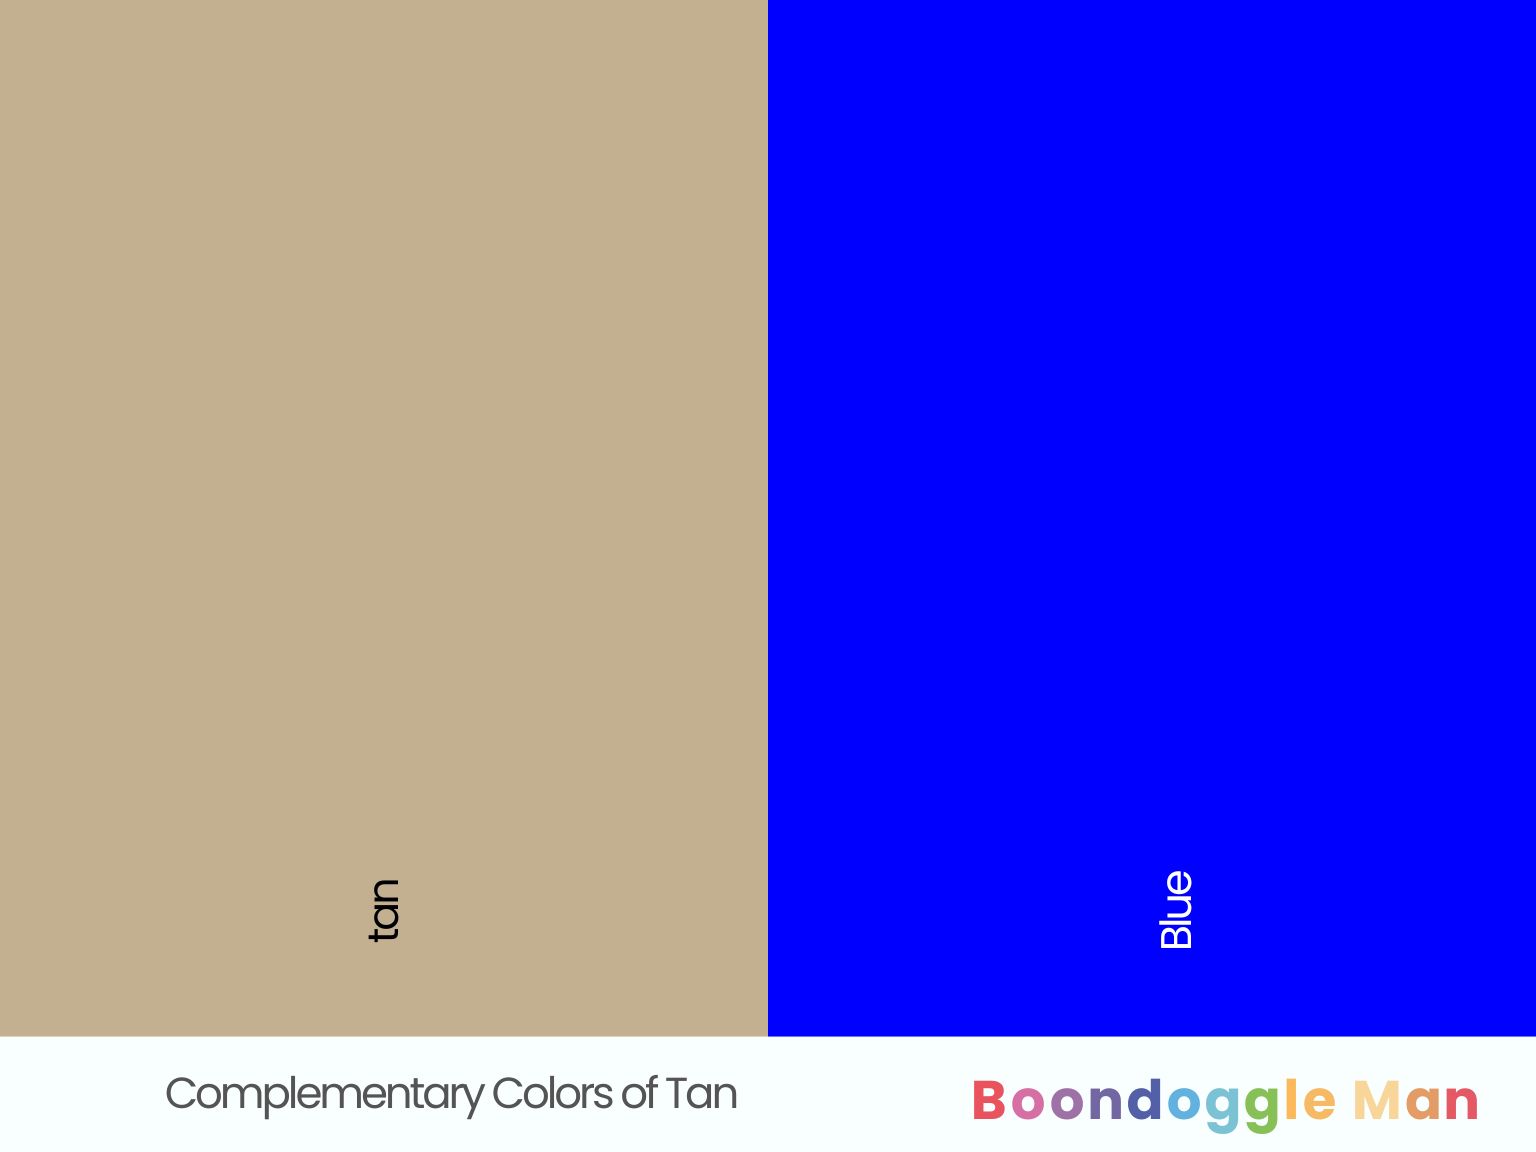 Complementary Colors of Tan